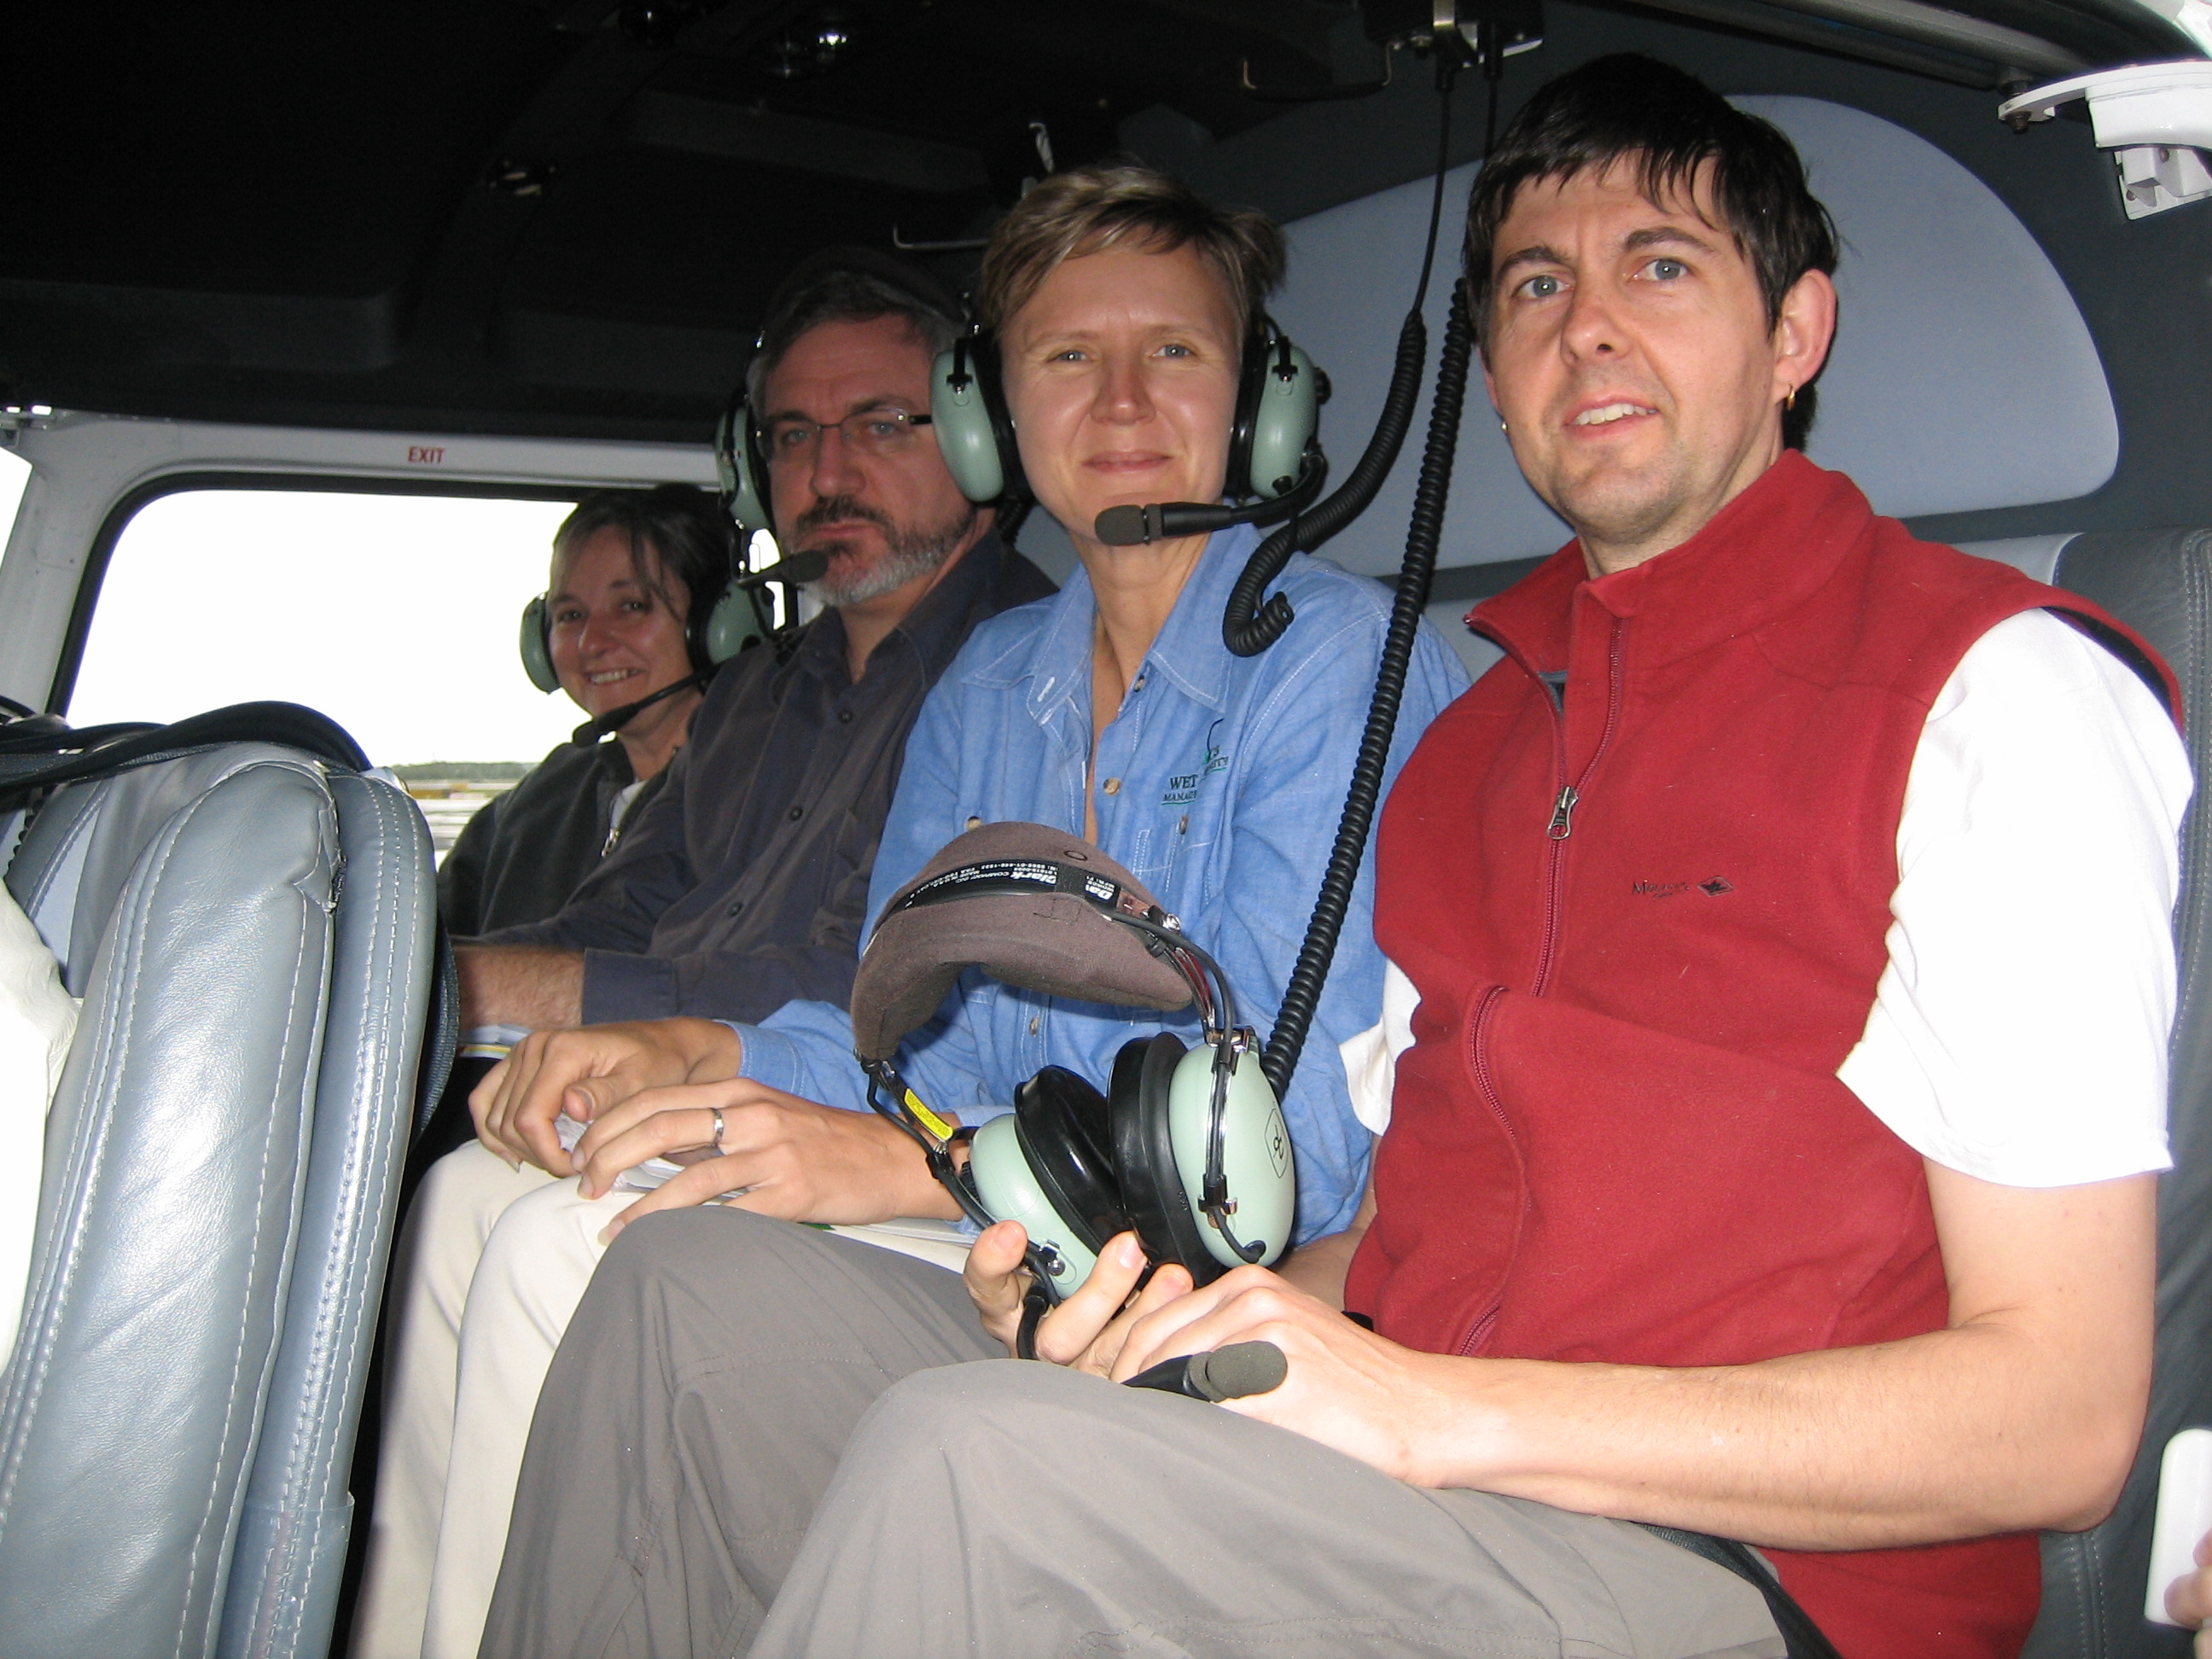 Committee visit to Cairns, Queensland, 29 June 2006. L-R: Senators Claire Moore and Andrew Bartlett [Chair], Josh Gibson [Executive Director, Wet Tropics Management Authority] and Dr Ian Holland [Secretary].